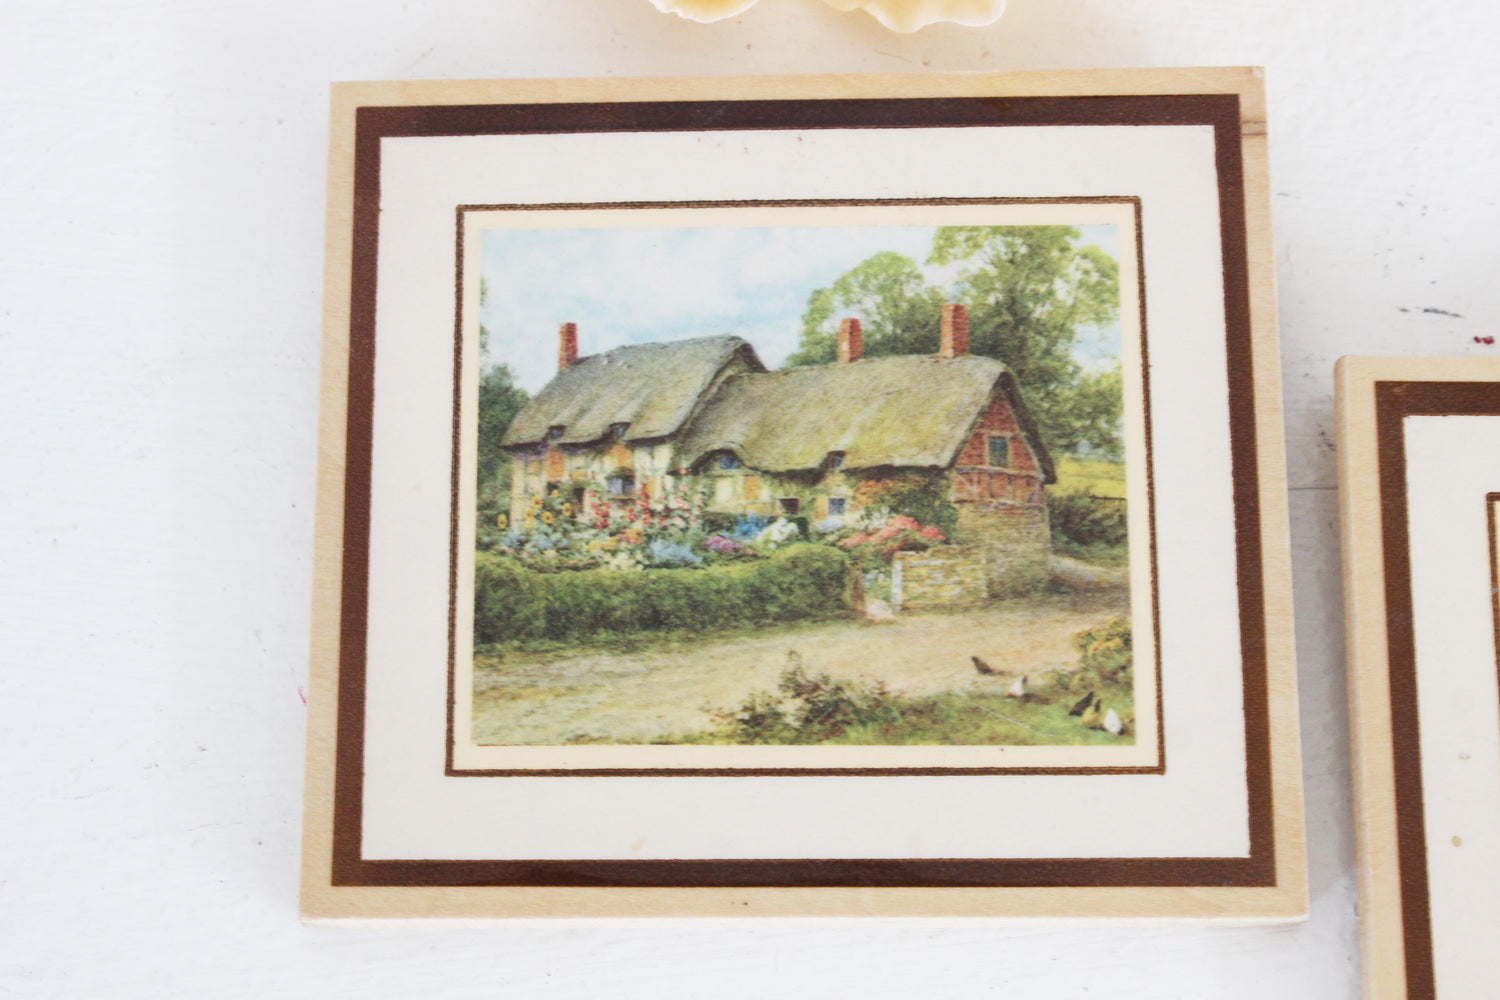 Vintage 1970s Prints on Wood Cottage Country Life Two